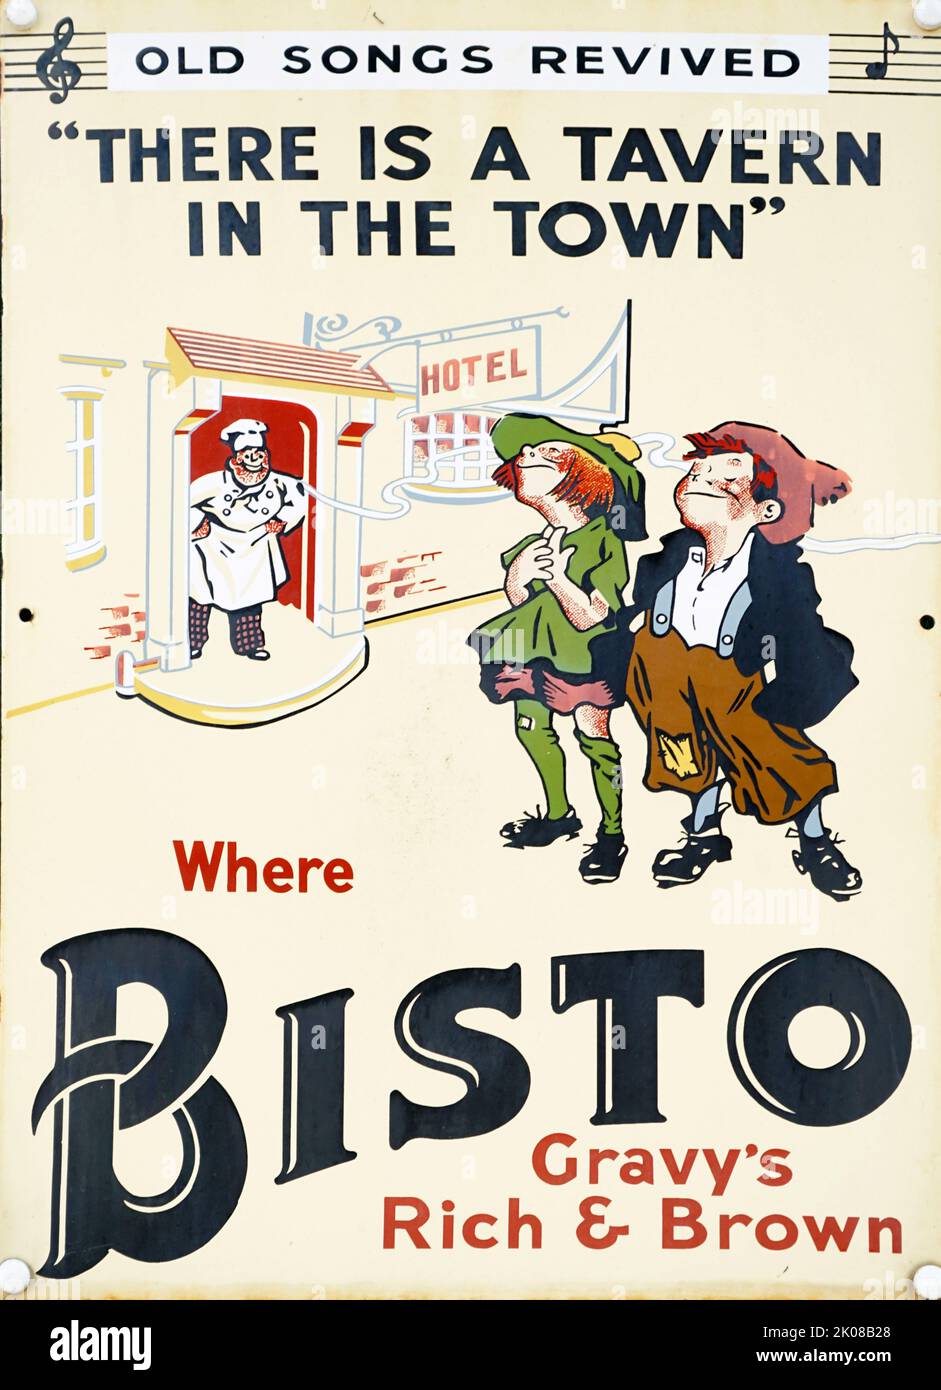 Advertisement for Bisto gravy, c1940s. Bisto is a popular and well-known brand of gravy and other food products in the United Kingdom and Ireland, currently owned by Premier Foods Stock Photo